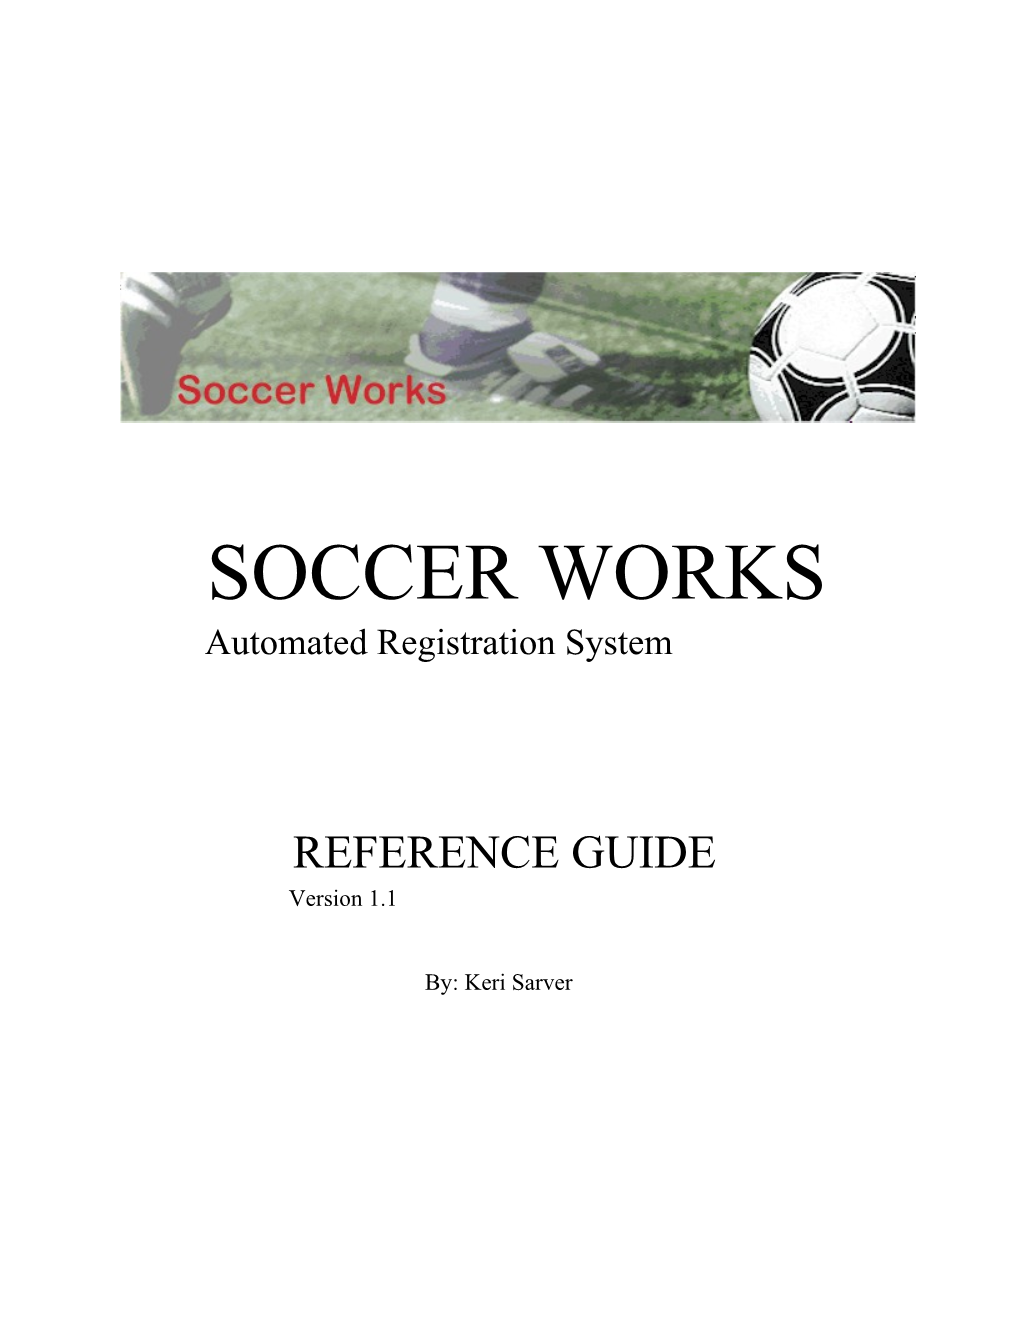 Soccer Works Reference Guide